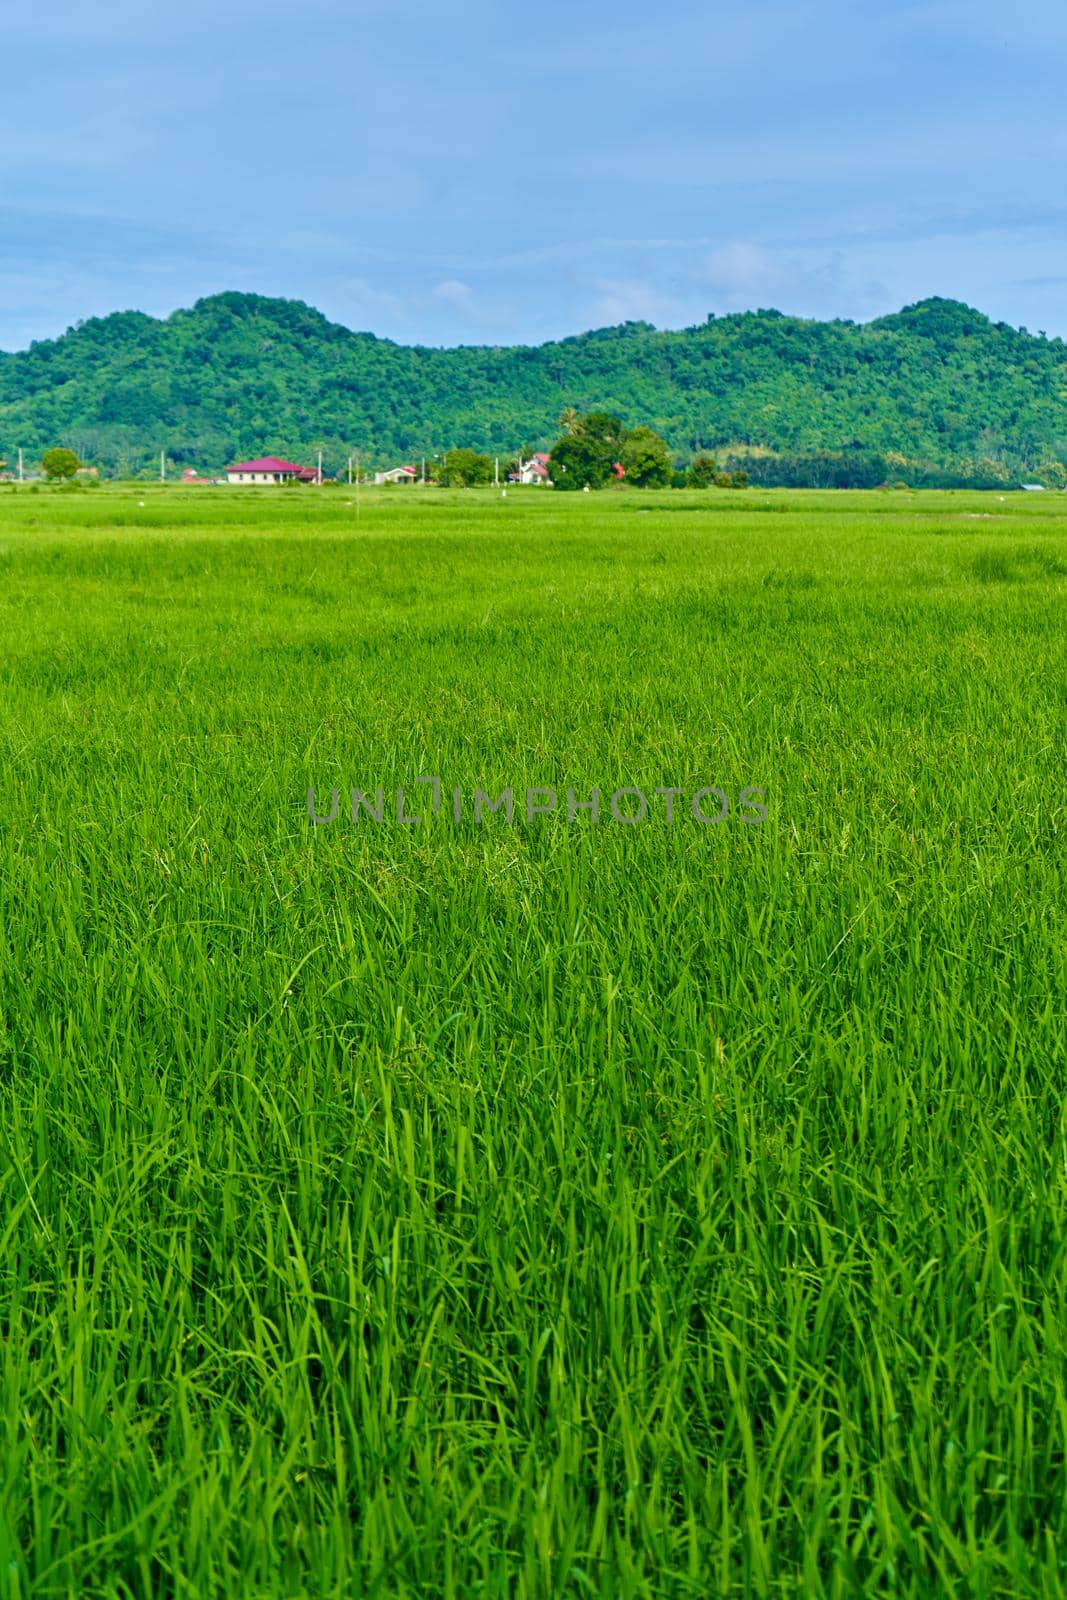 Impressive landscape green rice field with mountains in the background.